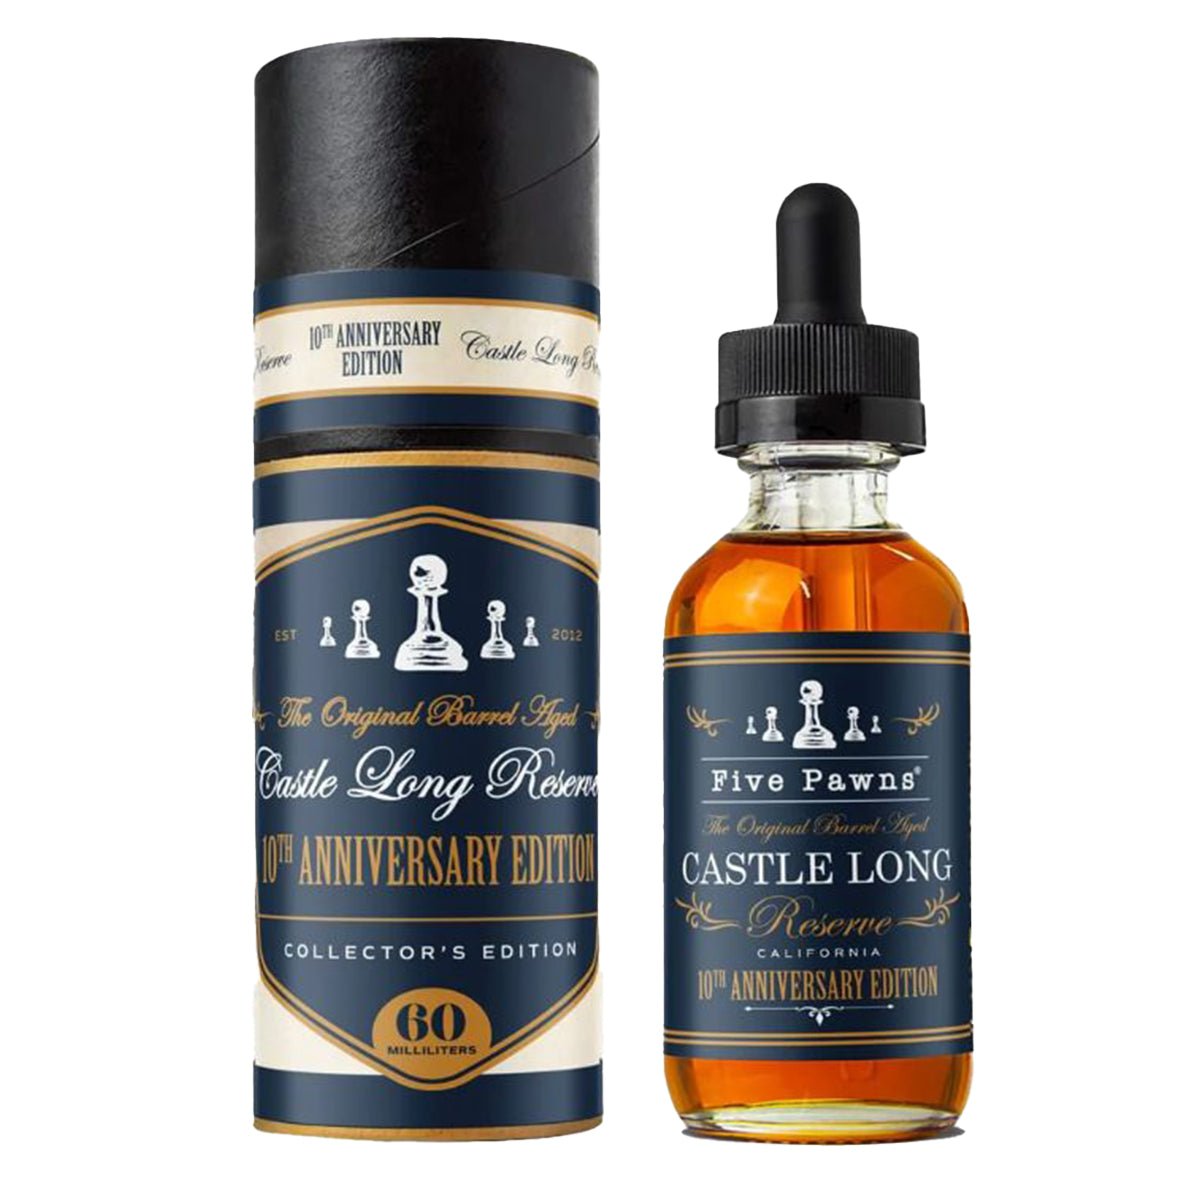 Castle Long Reserve 10th Anniversary Edition 50ml Shortfill By Five Pawns - Prime Vapes UK